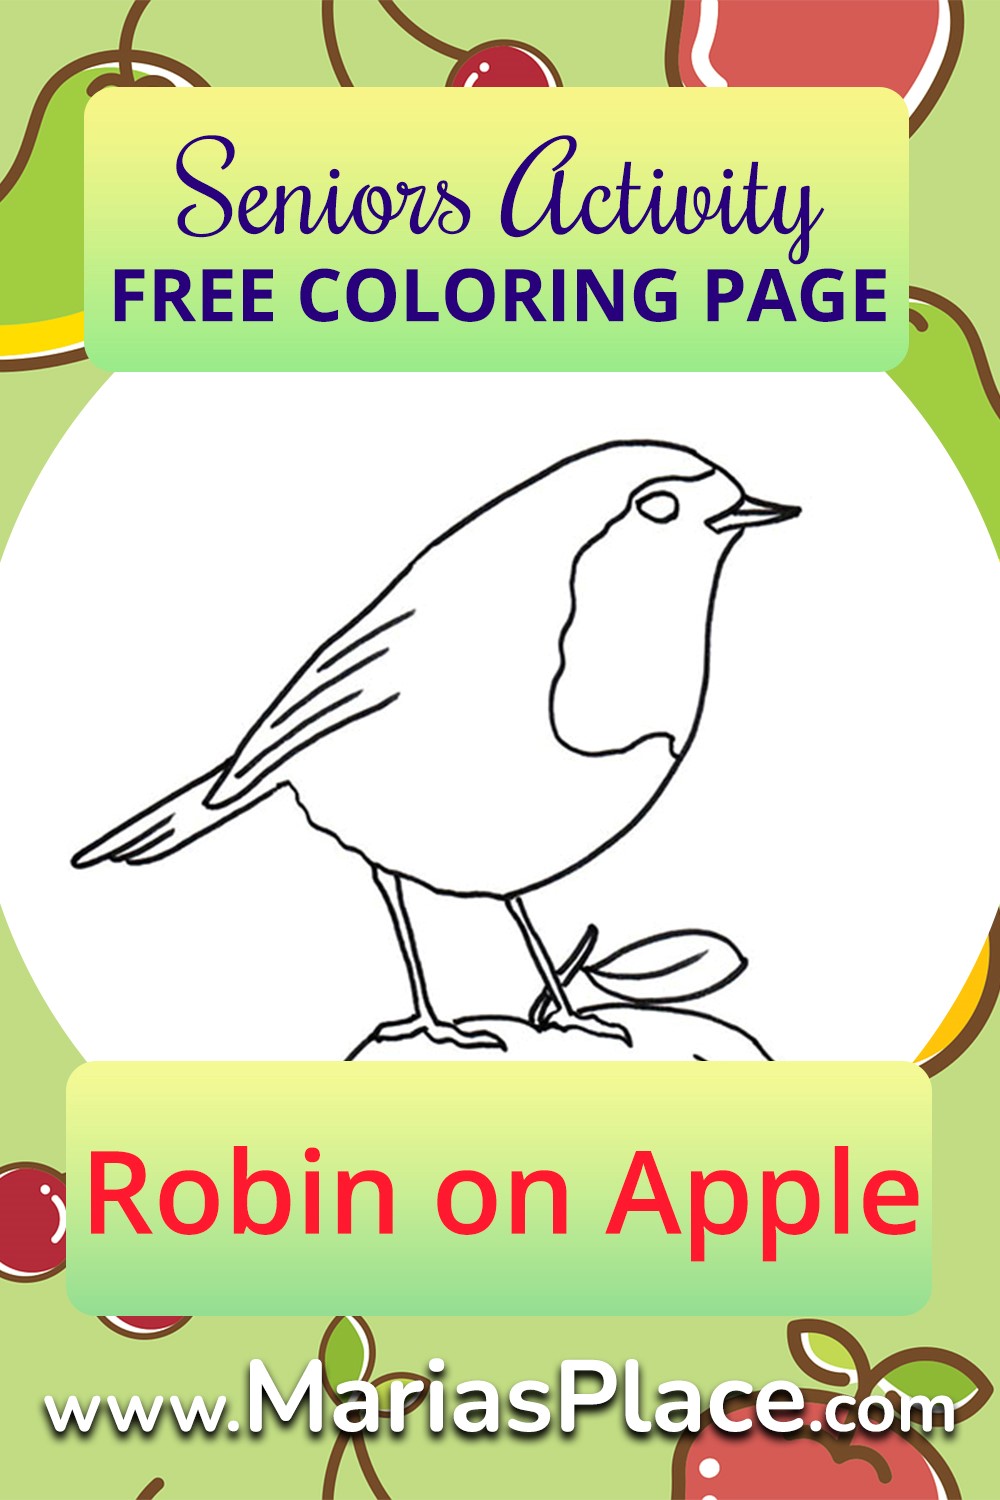 Coloring – Robin on Apple